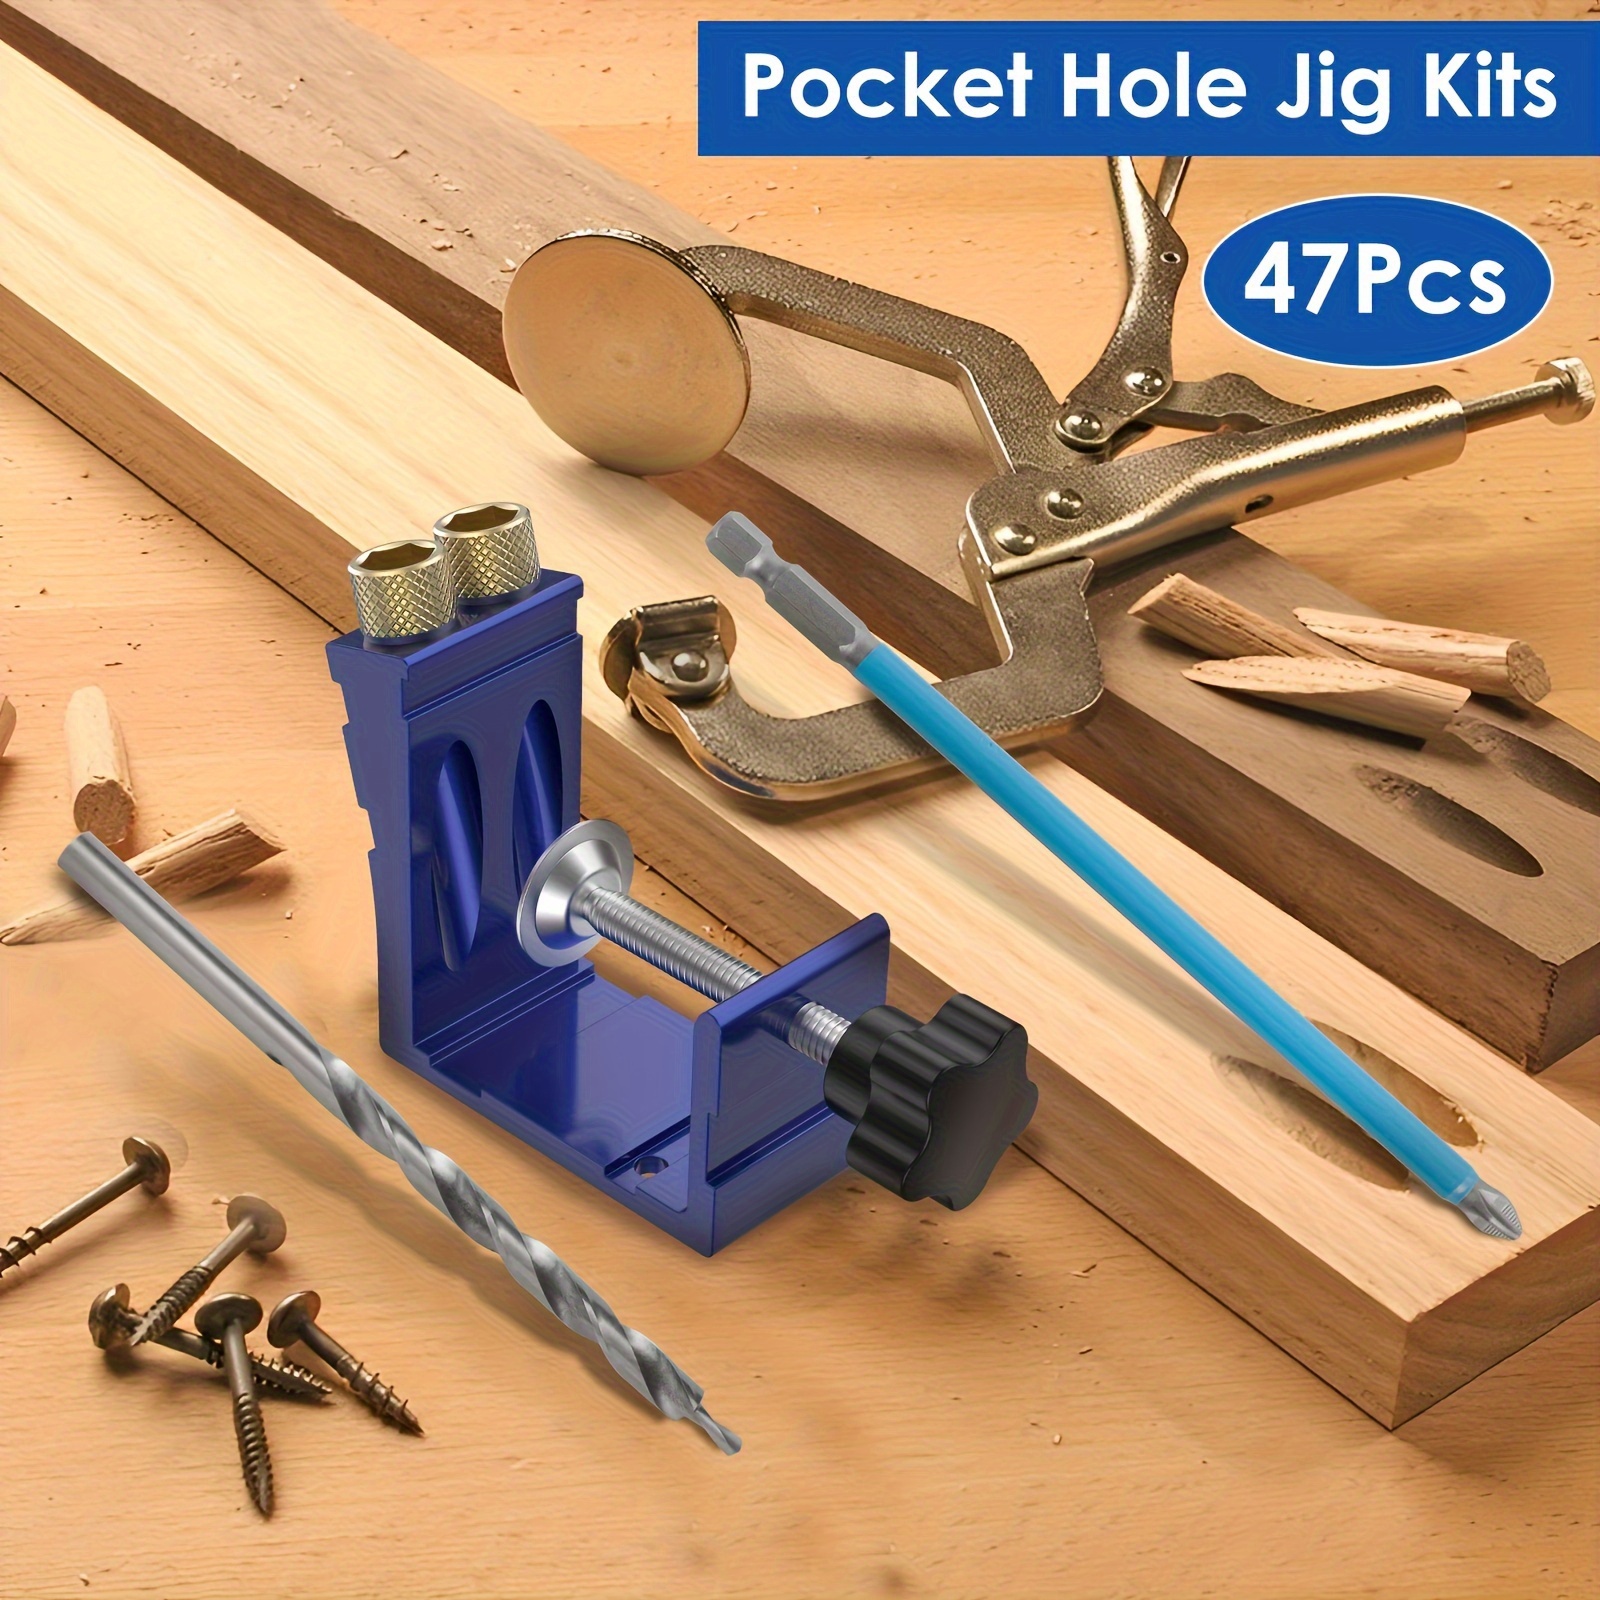 

47pcs Pocket Hole Jig Kit, High Precision 15-degree Angle Woodworking Drill Guide Kit For Diy Joinery Carpenter Projects